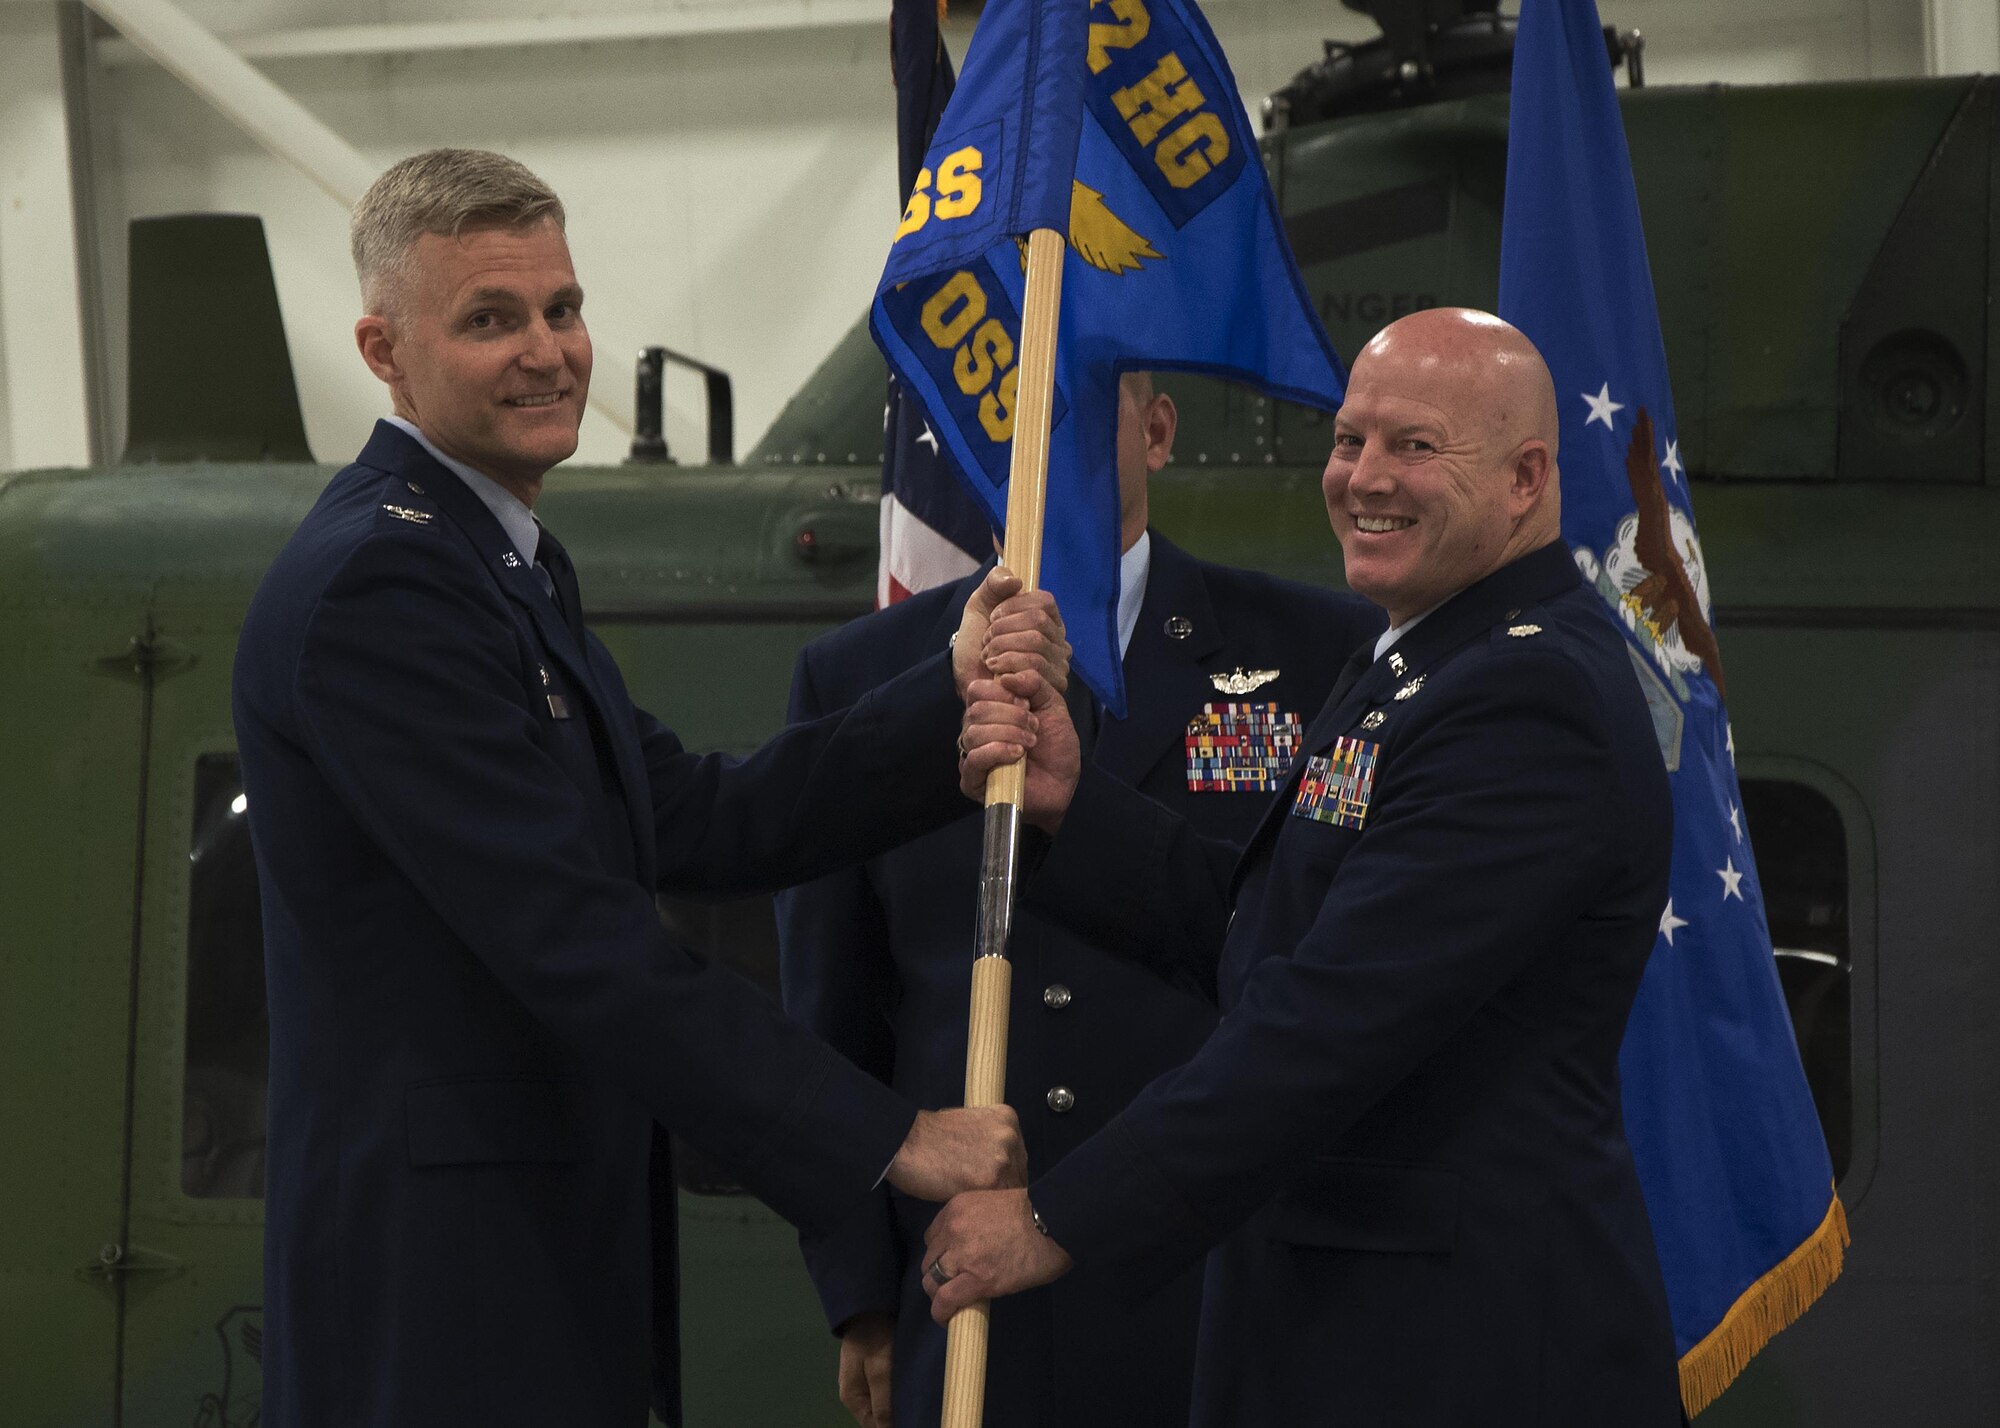 Col. David Smith, 582nd Helicopter Group commander, passes the guidon to Lt. Col. Christopher Roness, 582nd Operation Support Squadron commander, during the 582nd OSS assumption-of-command ceremony August 5, 2016, at F.E. Warren Air Force Base, Wyo. The ceremony signified the transition authority and responsibility of the squadron to Roness. (U.S. Air Force photo by Senior Airman Brandon Valle)